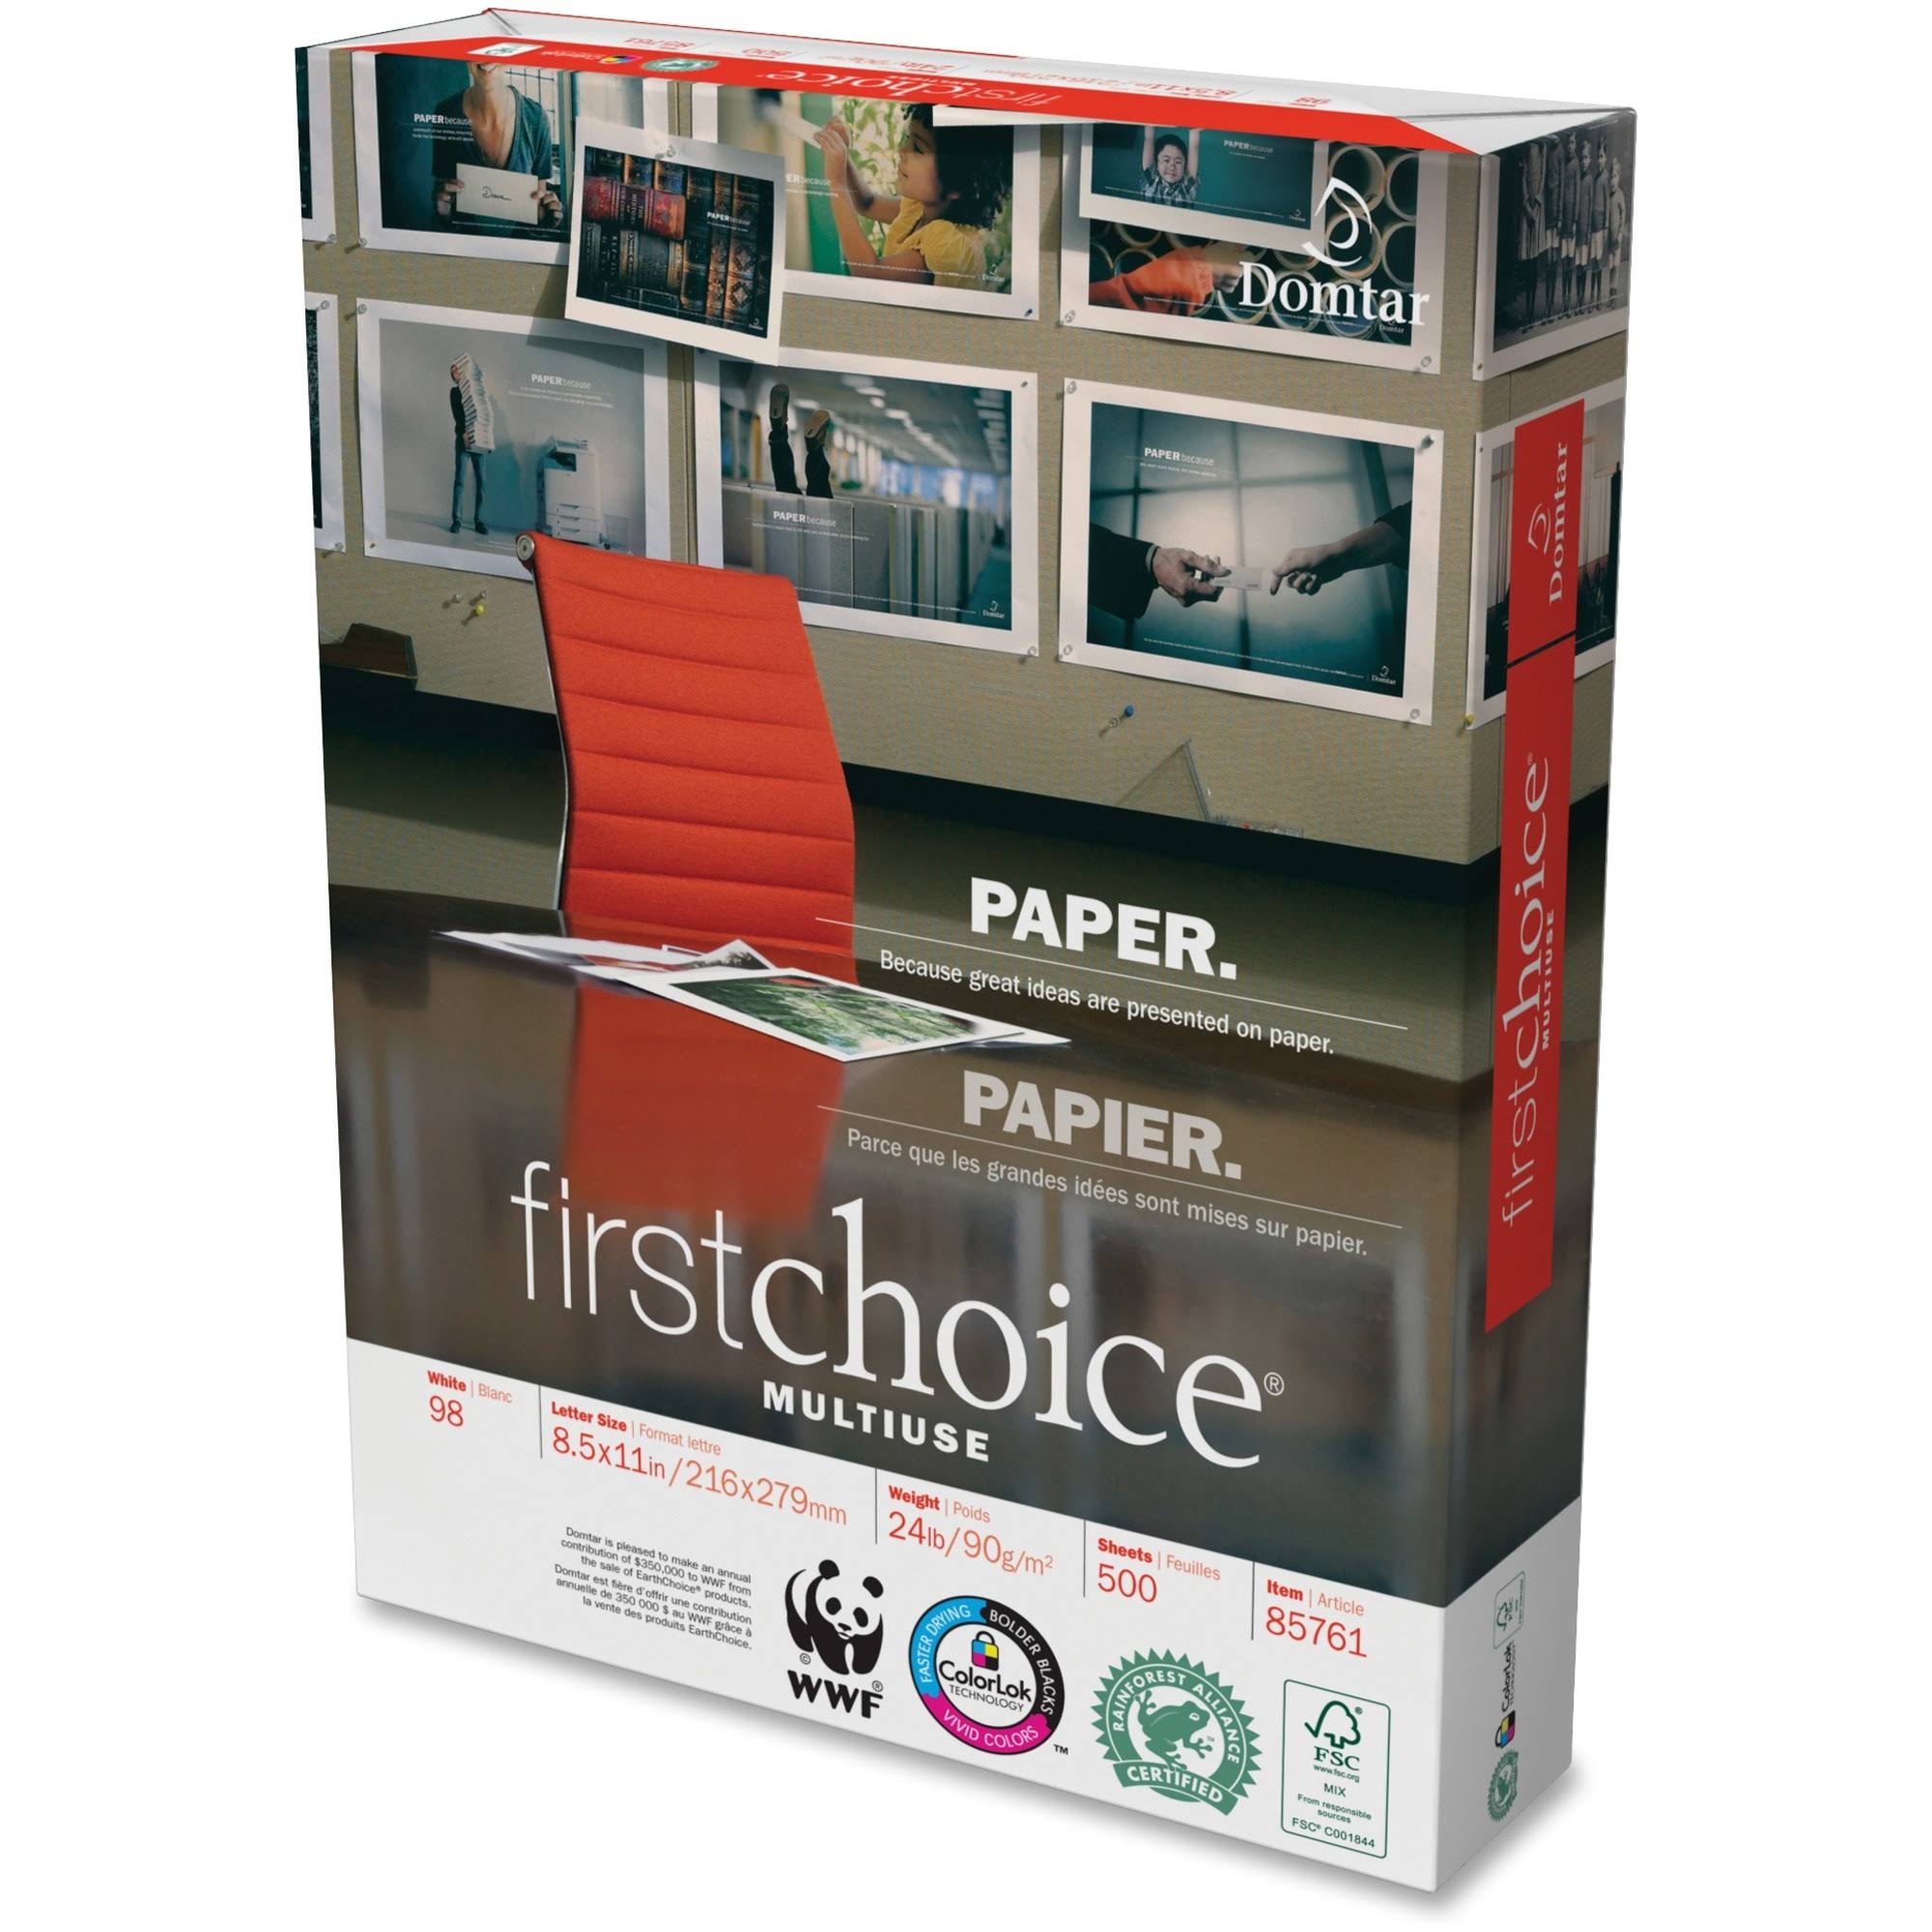 Domtar First Choice Multi Use Paper - White, 8 1/2" x 11"